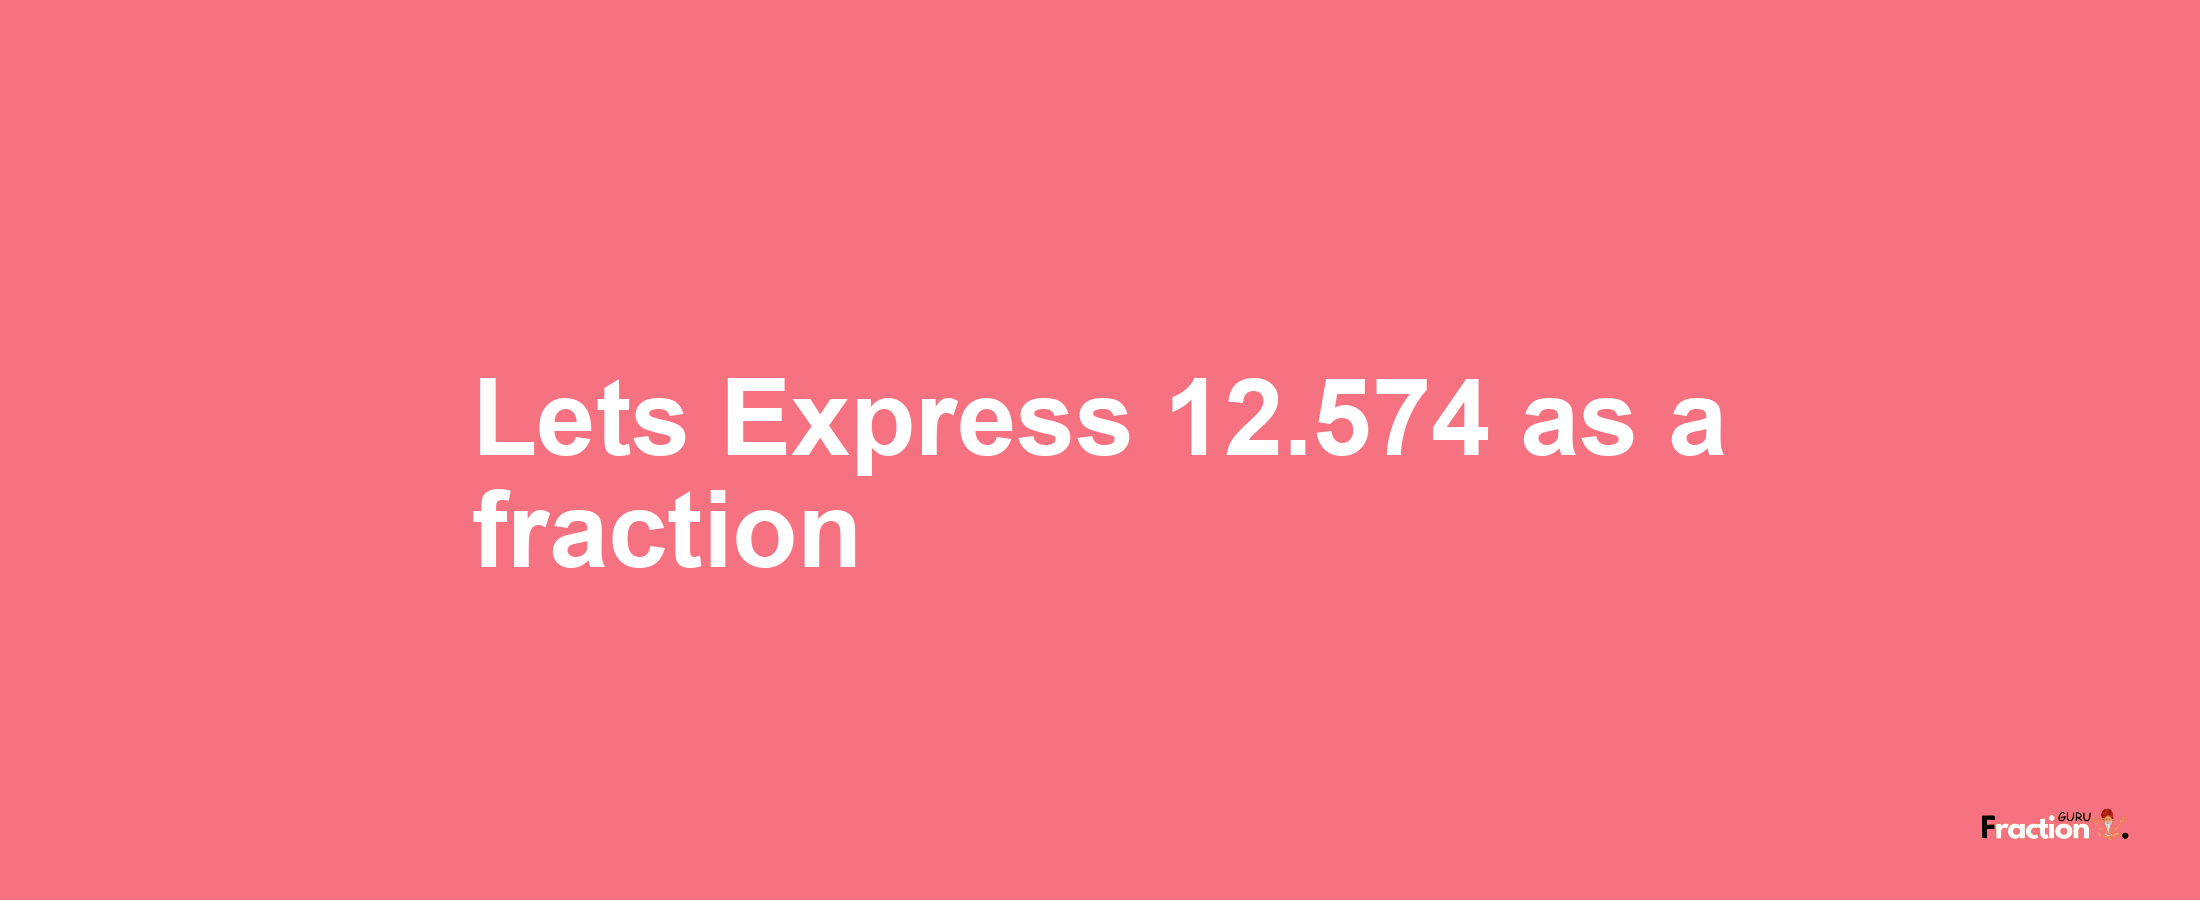 Lets Express 12.574 as afraction